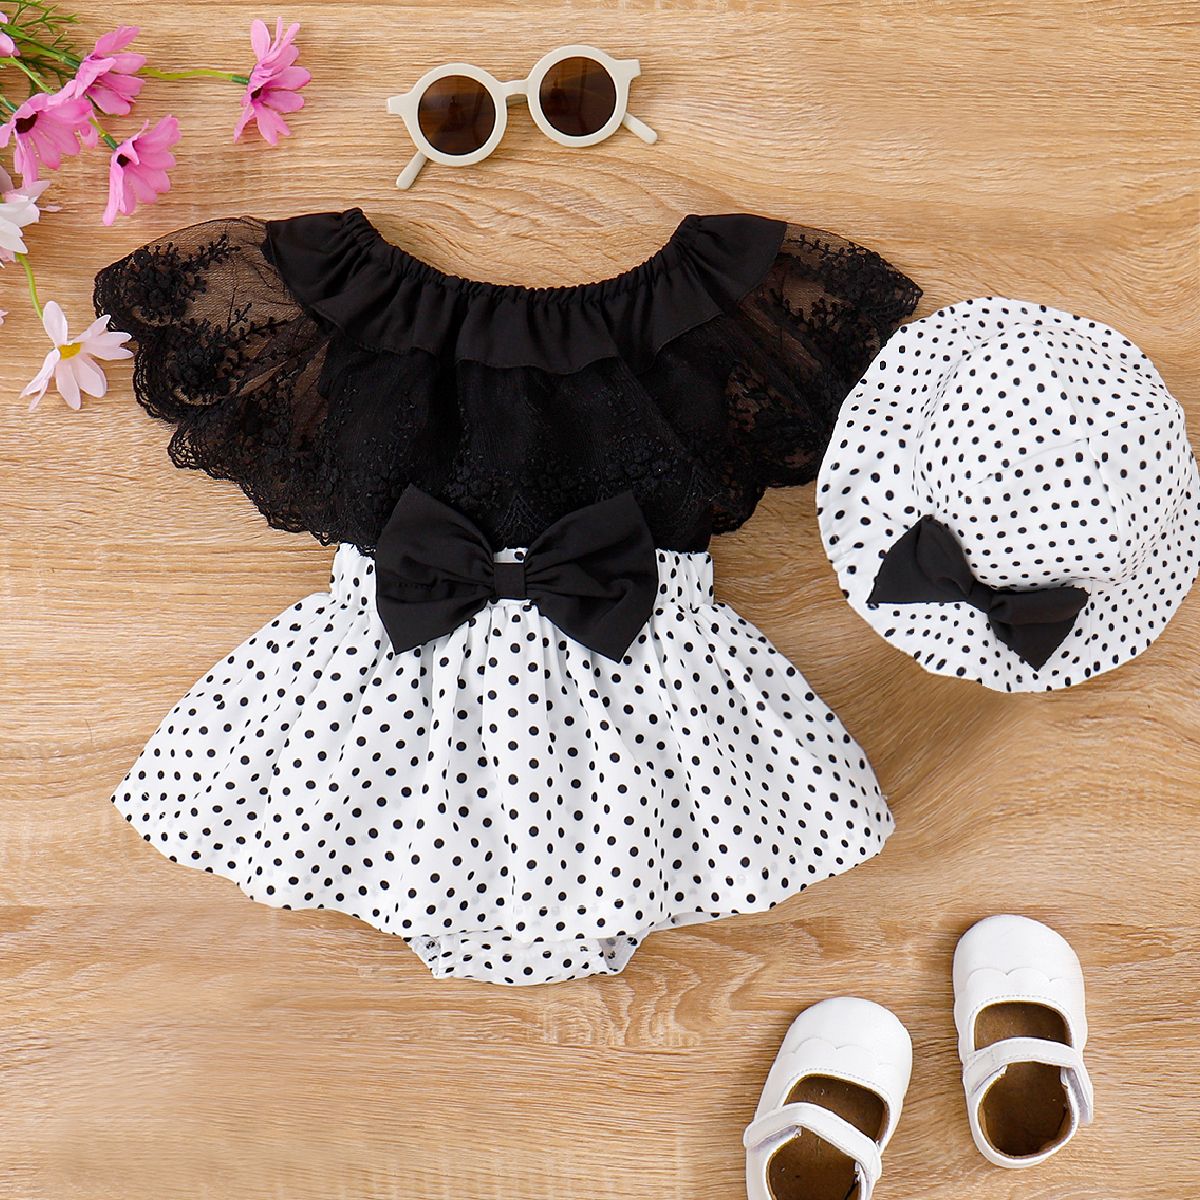 Baby Girl 3pcs Lace Splicing Tee, Polka Dot Crotchless Skirts And Hat Set/ Sandals